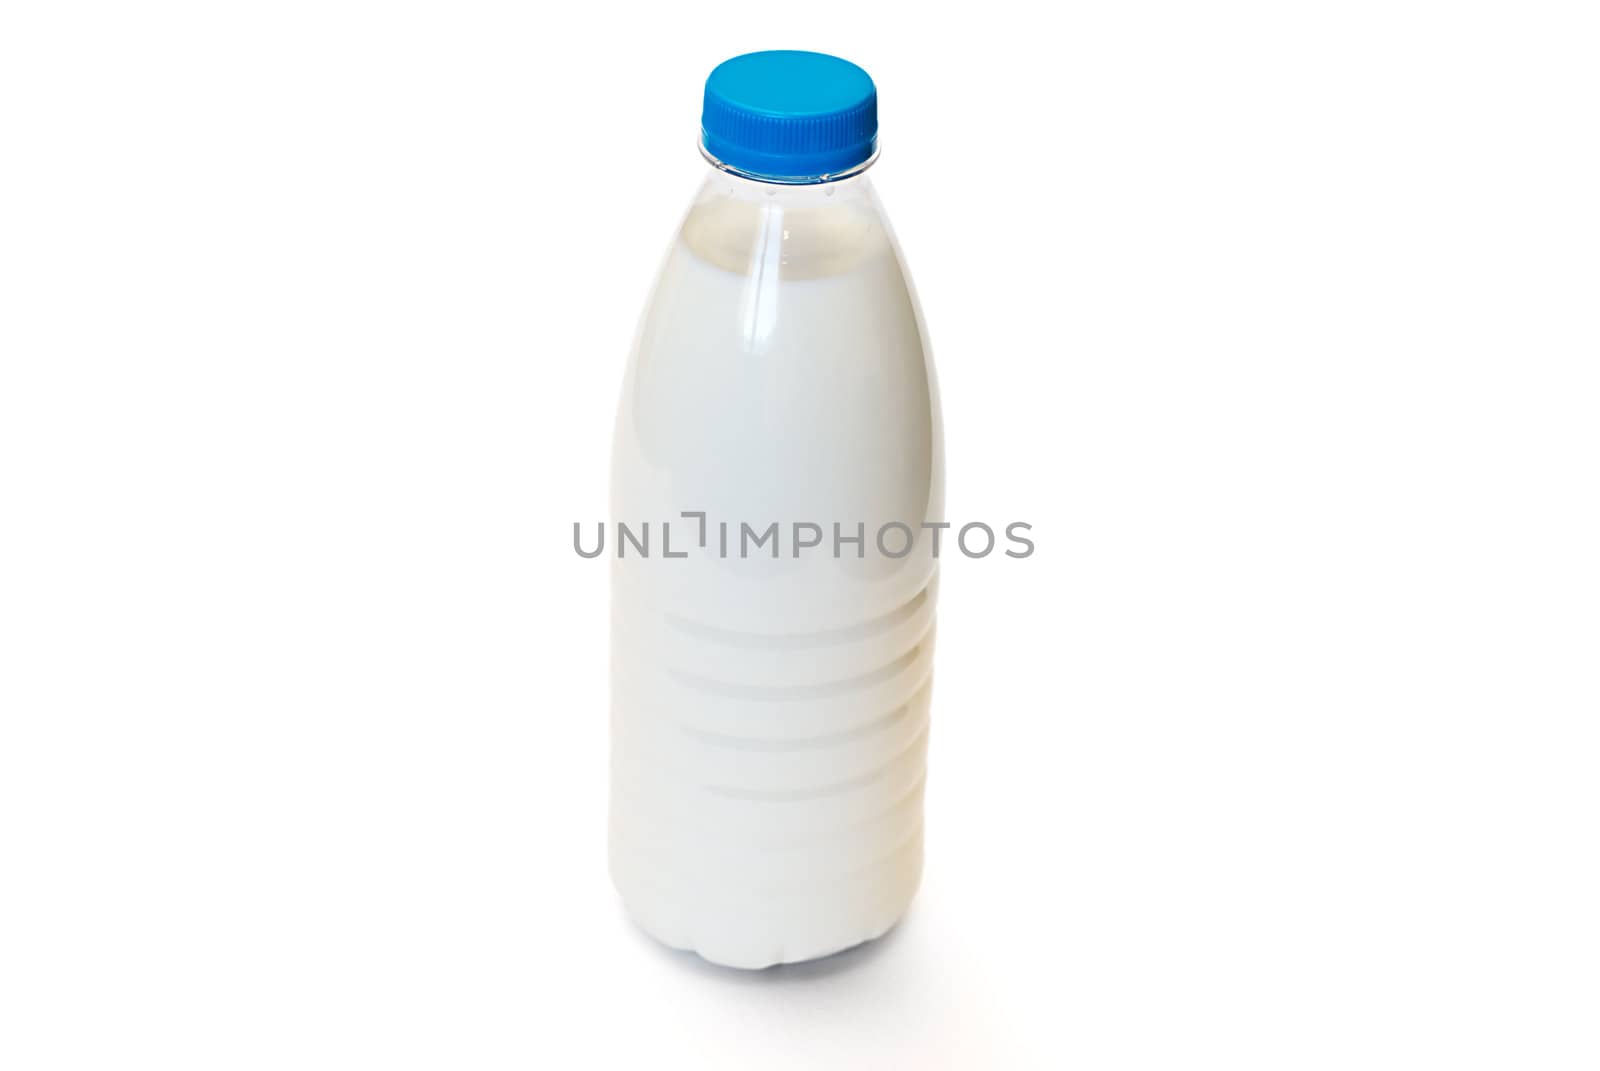 The full bottle of milk by BIG_TAU